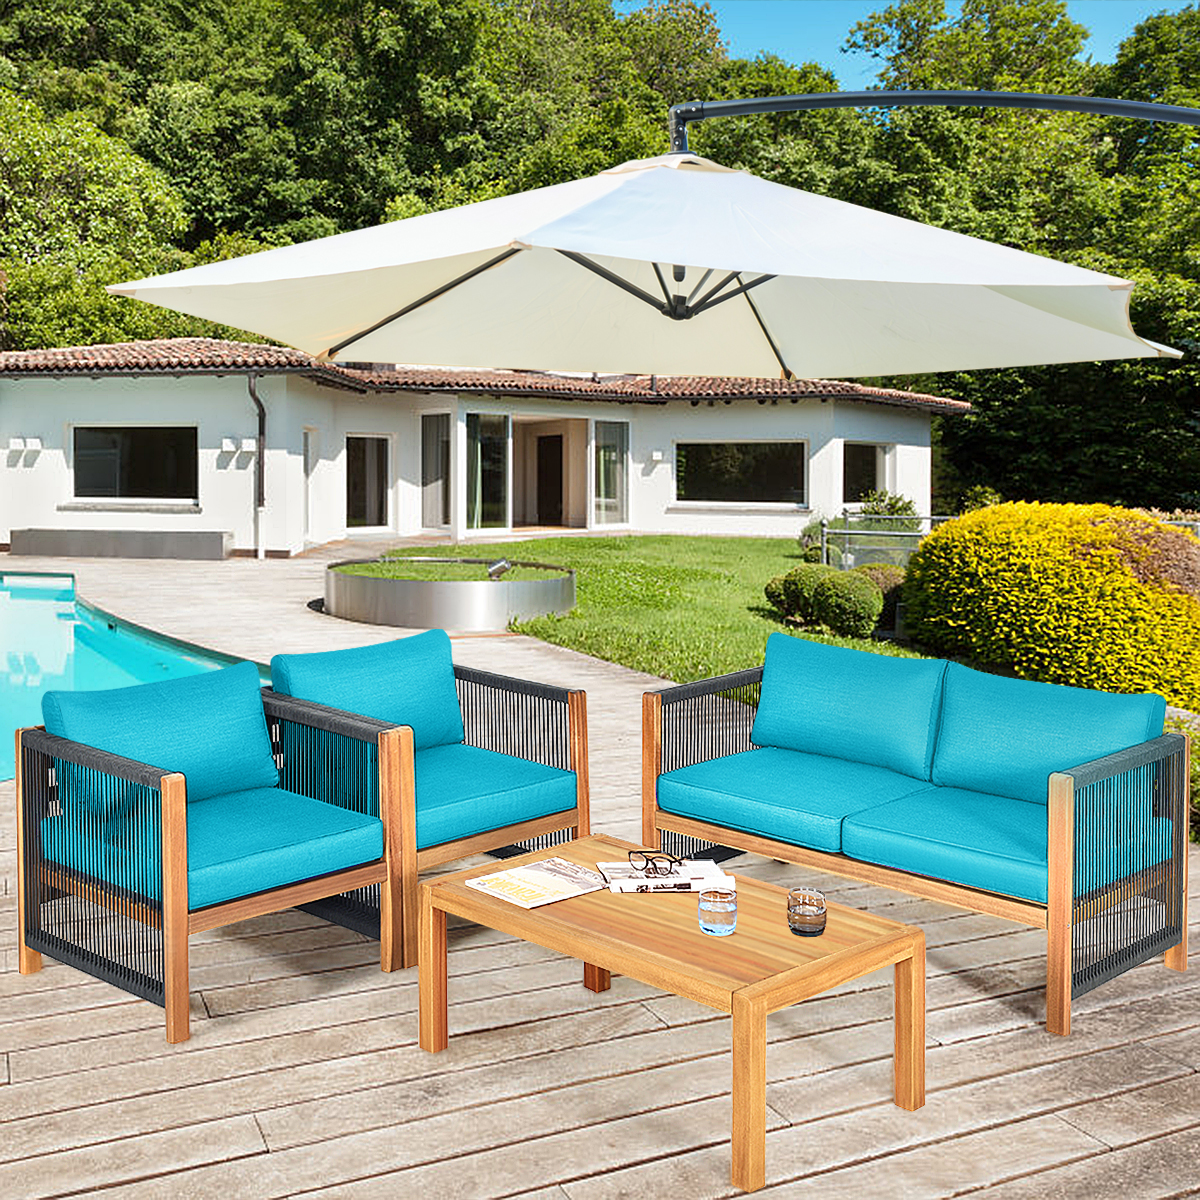 Patiojoy 4-Piece Outdoor Patio Wood Conversation Furniture Set Padded Chair with Coffee Table Turquoise - image 2 of 5